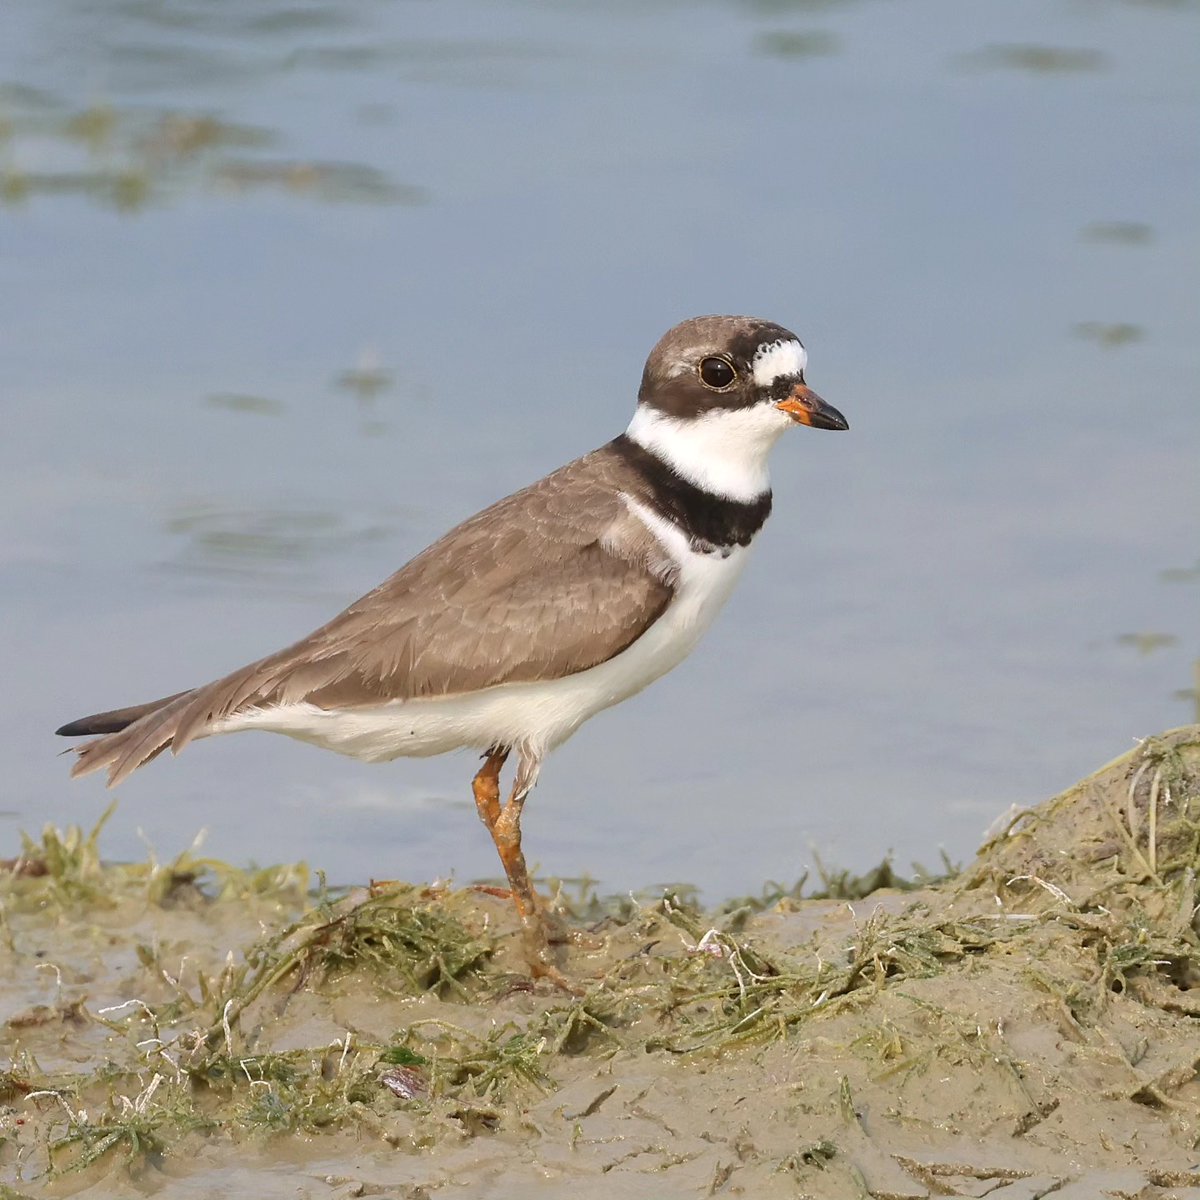 Species: Semipalmated Plover (Charadrius semipalmatus)
Location: Spanish Lookout, Belize
Status in Belize:  Fairly common Aug-May on coast and cayes
Photo📷: Leslie Penner
#BirdsofBelize #BirdsSeenIn2024 #birds #BirdsOfX #BirdsOfTwitter